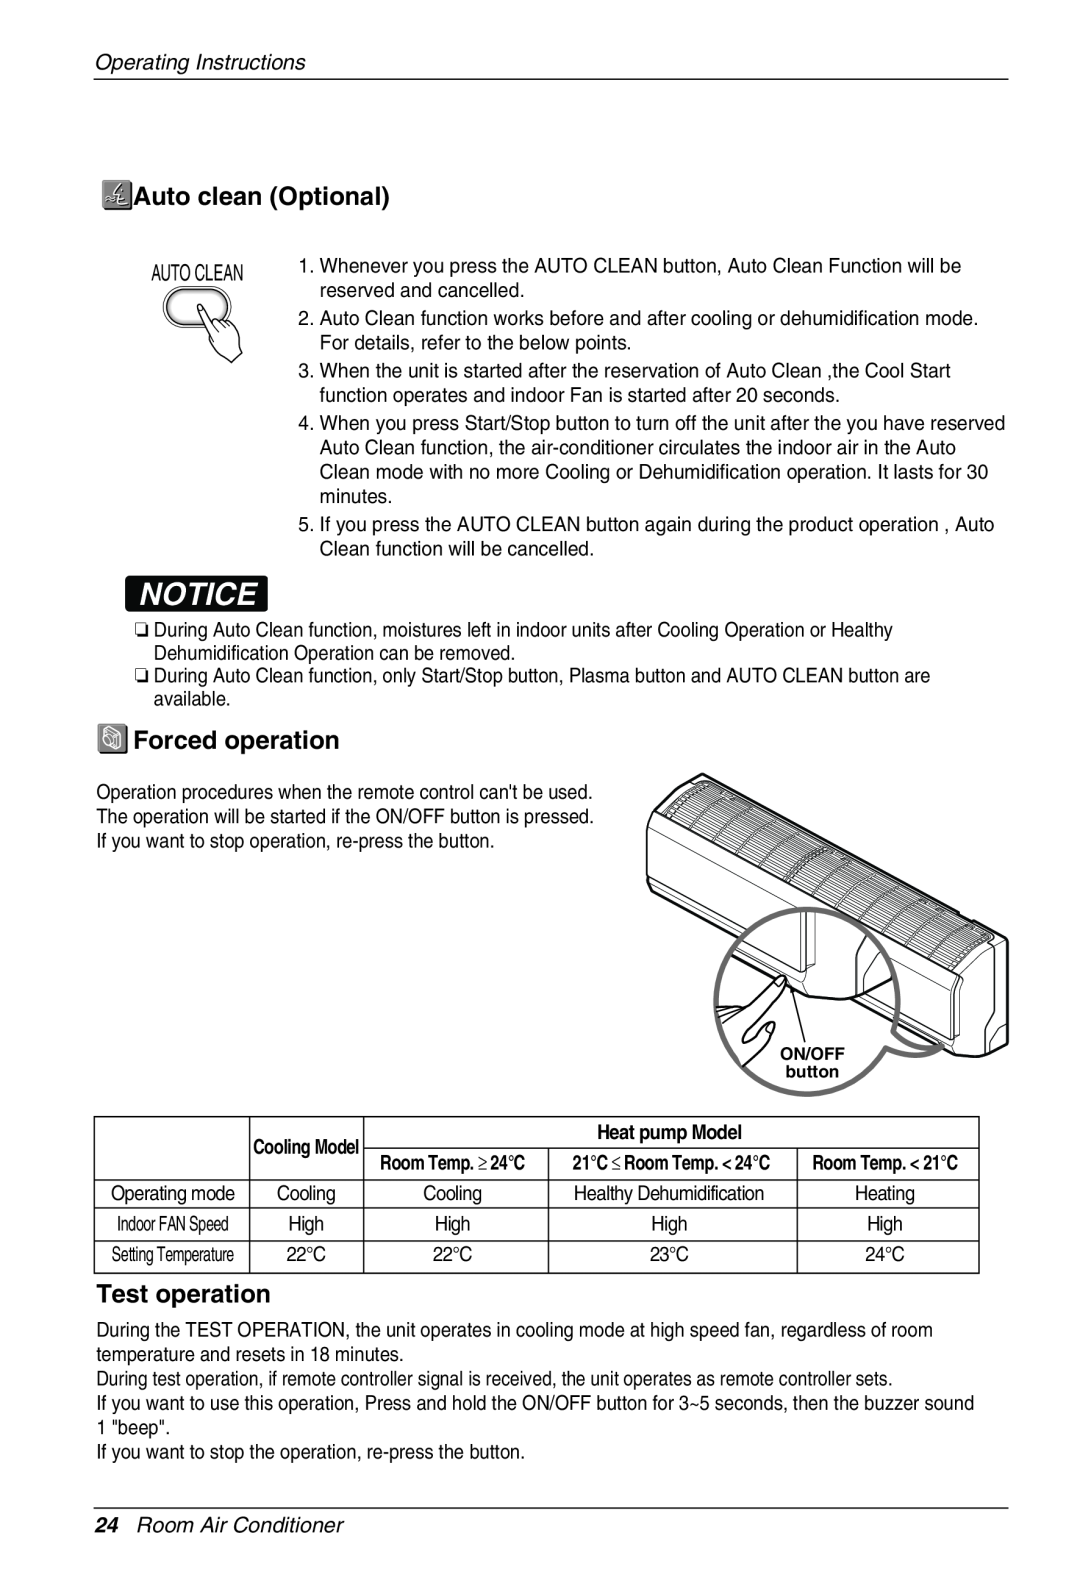 Beko LG-BKE 7800 D Auto clean Optional, Forced operation, Test operation, Operating Instructions, 24Room Air Conditioner 